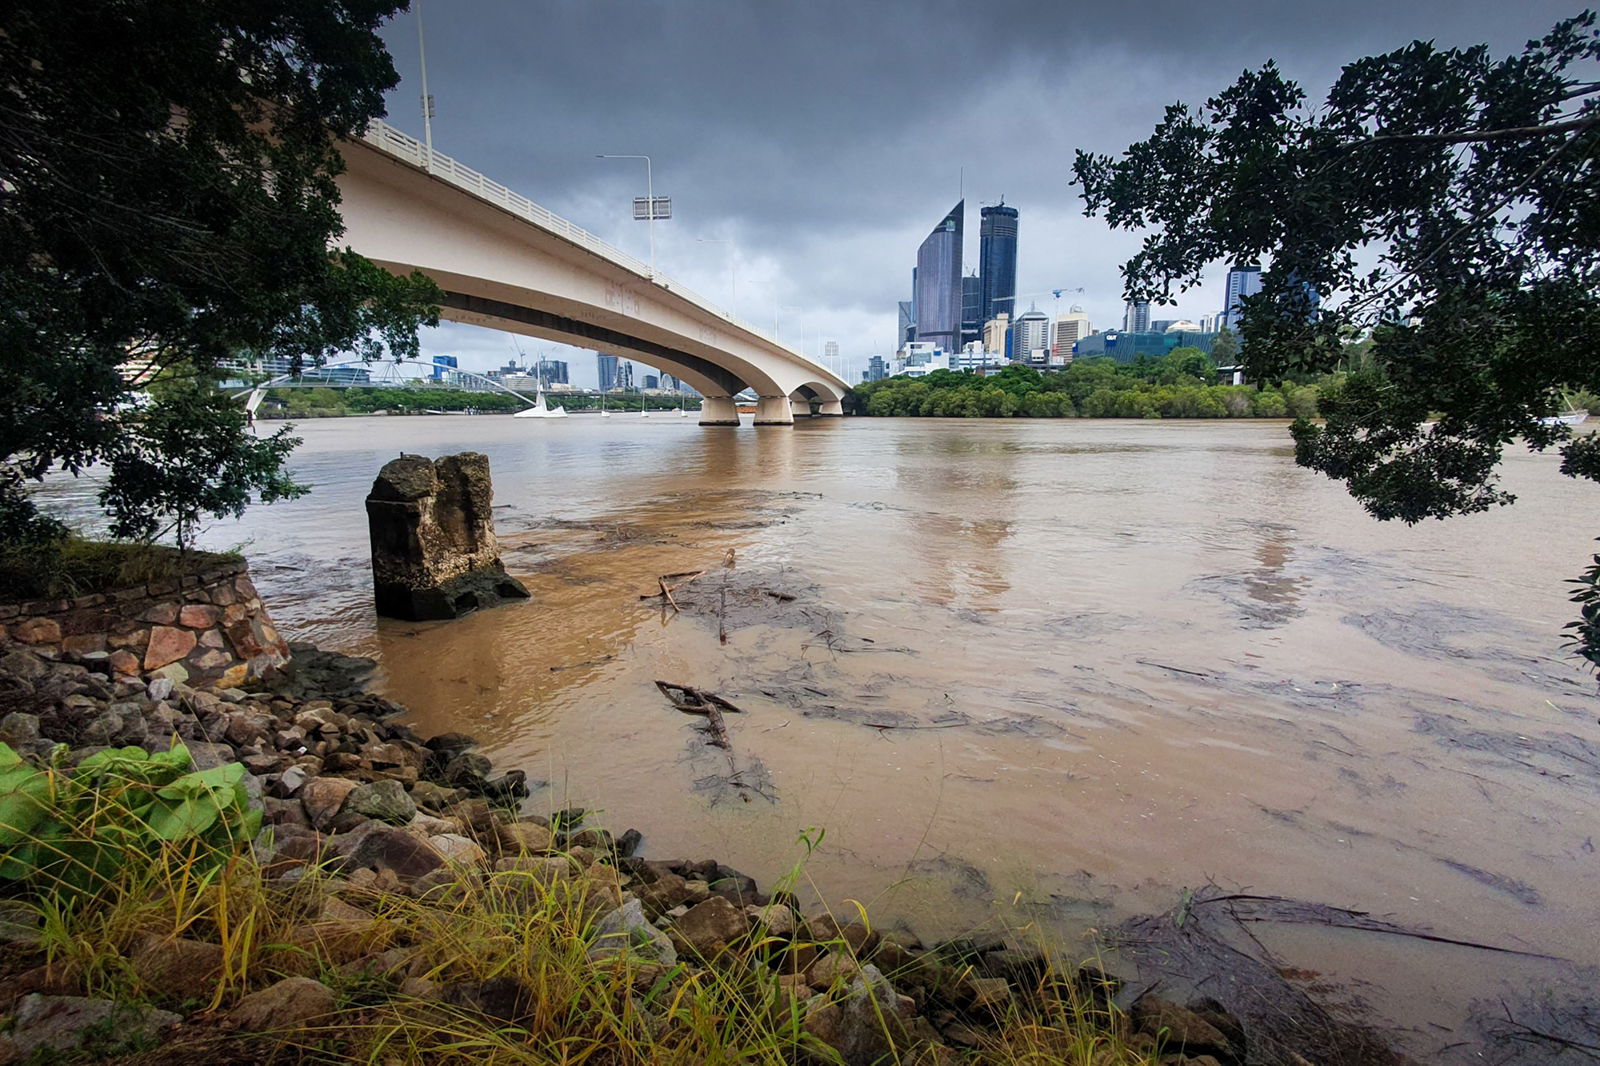 A view of muddy water on the banks of the Brisbane River.